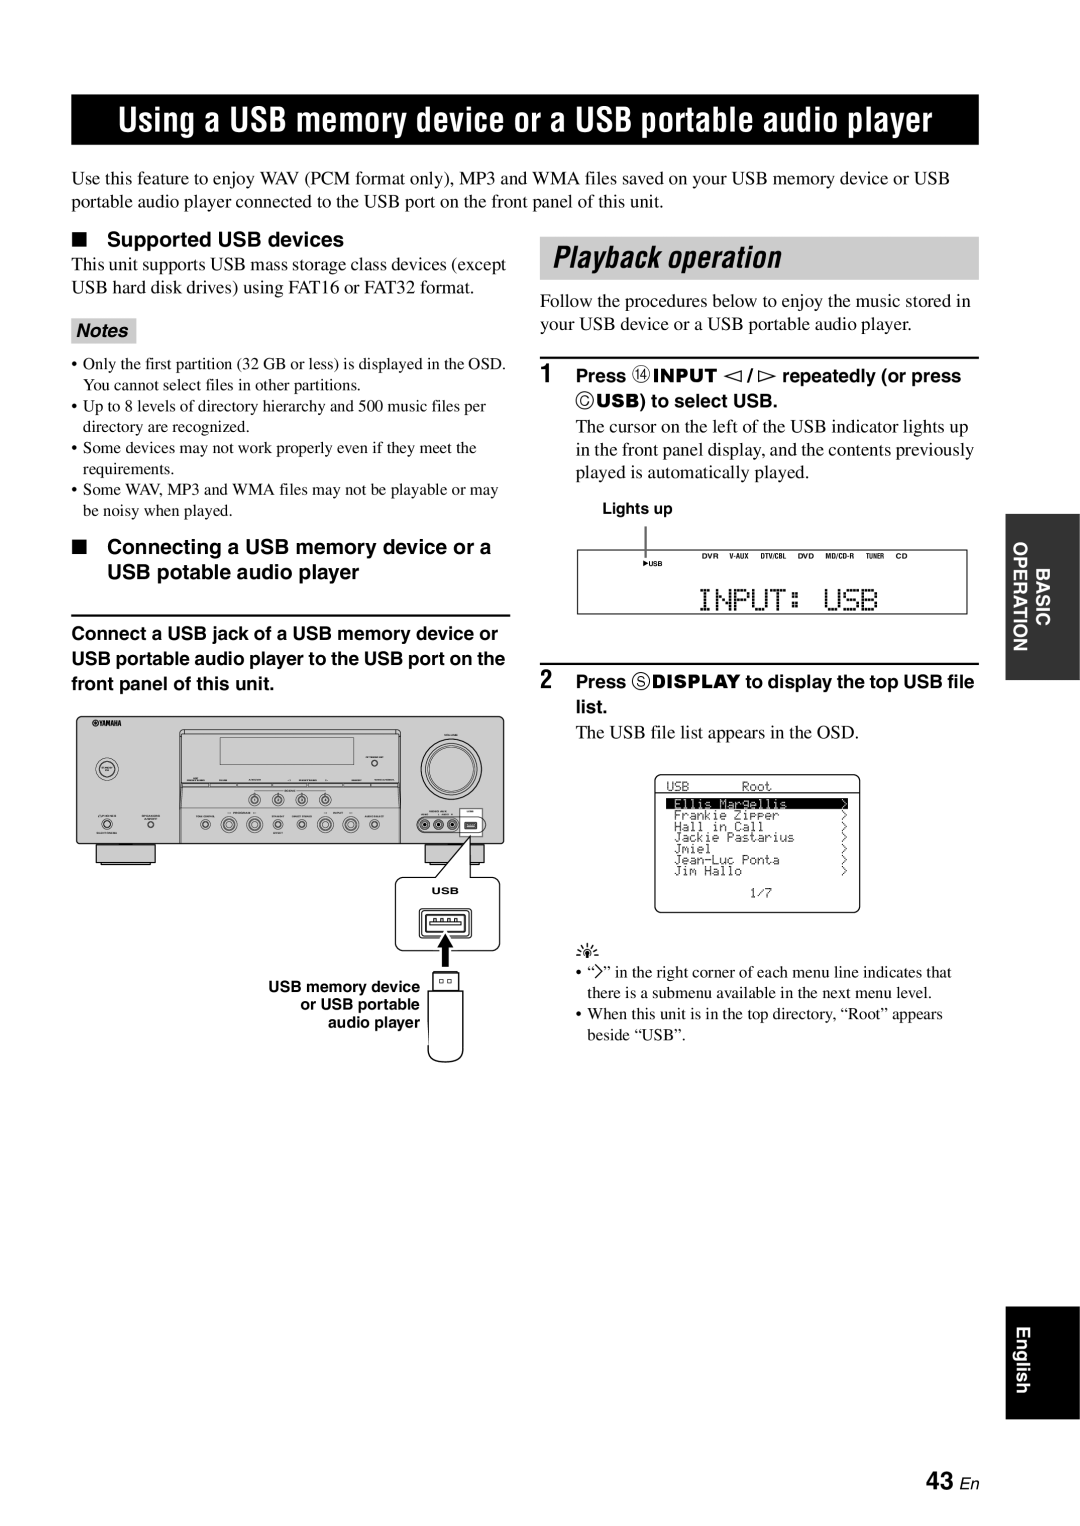 Yamaha RX-V561 owner manual Playback operation, 43 En, Supported USB devices, Notes 